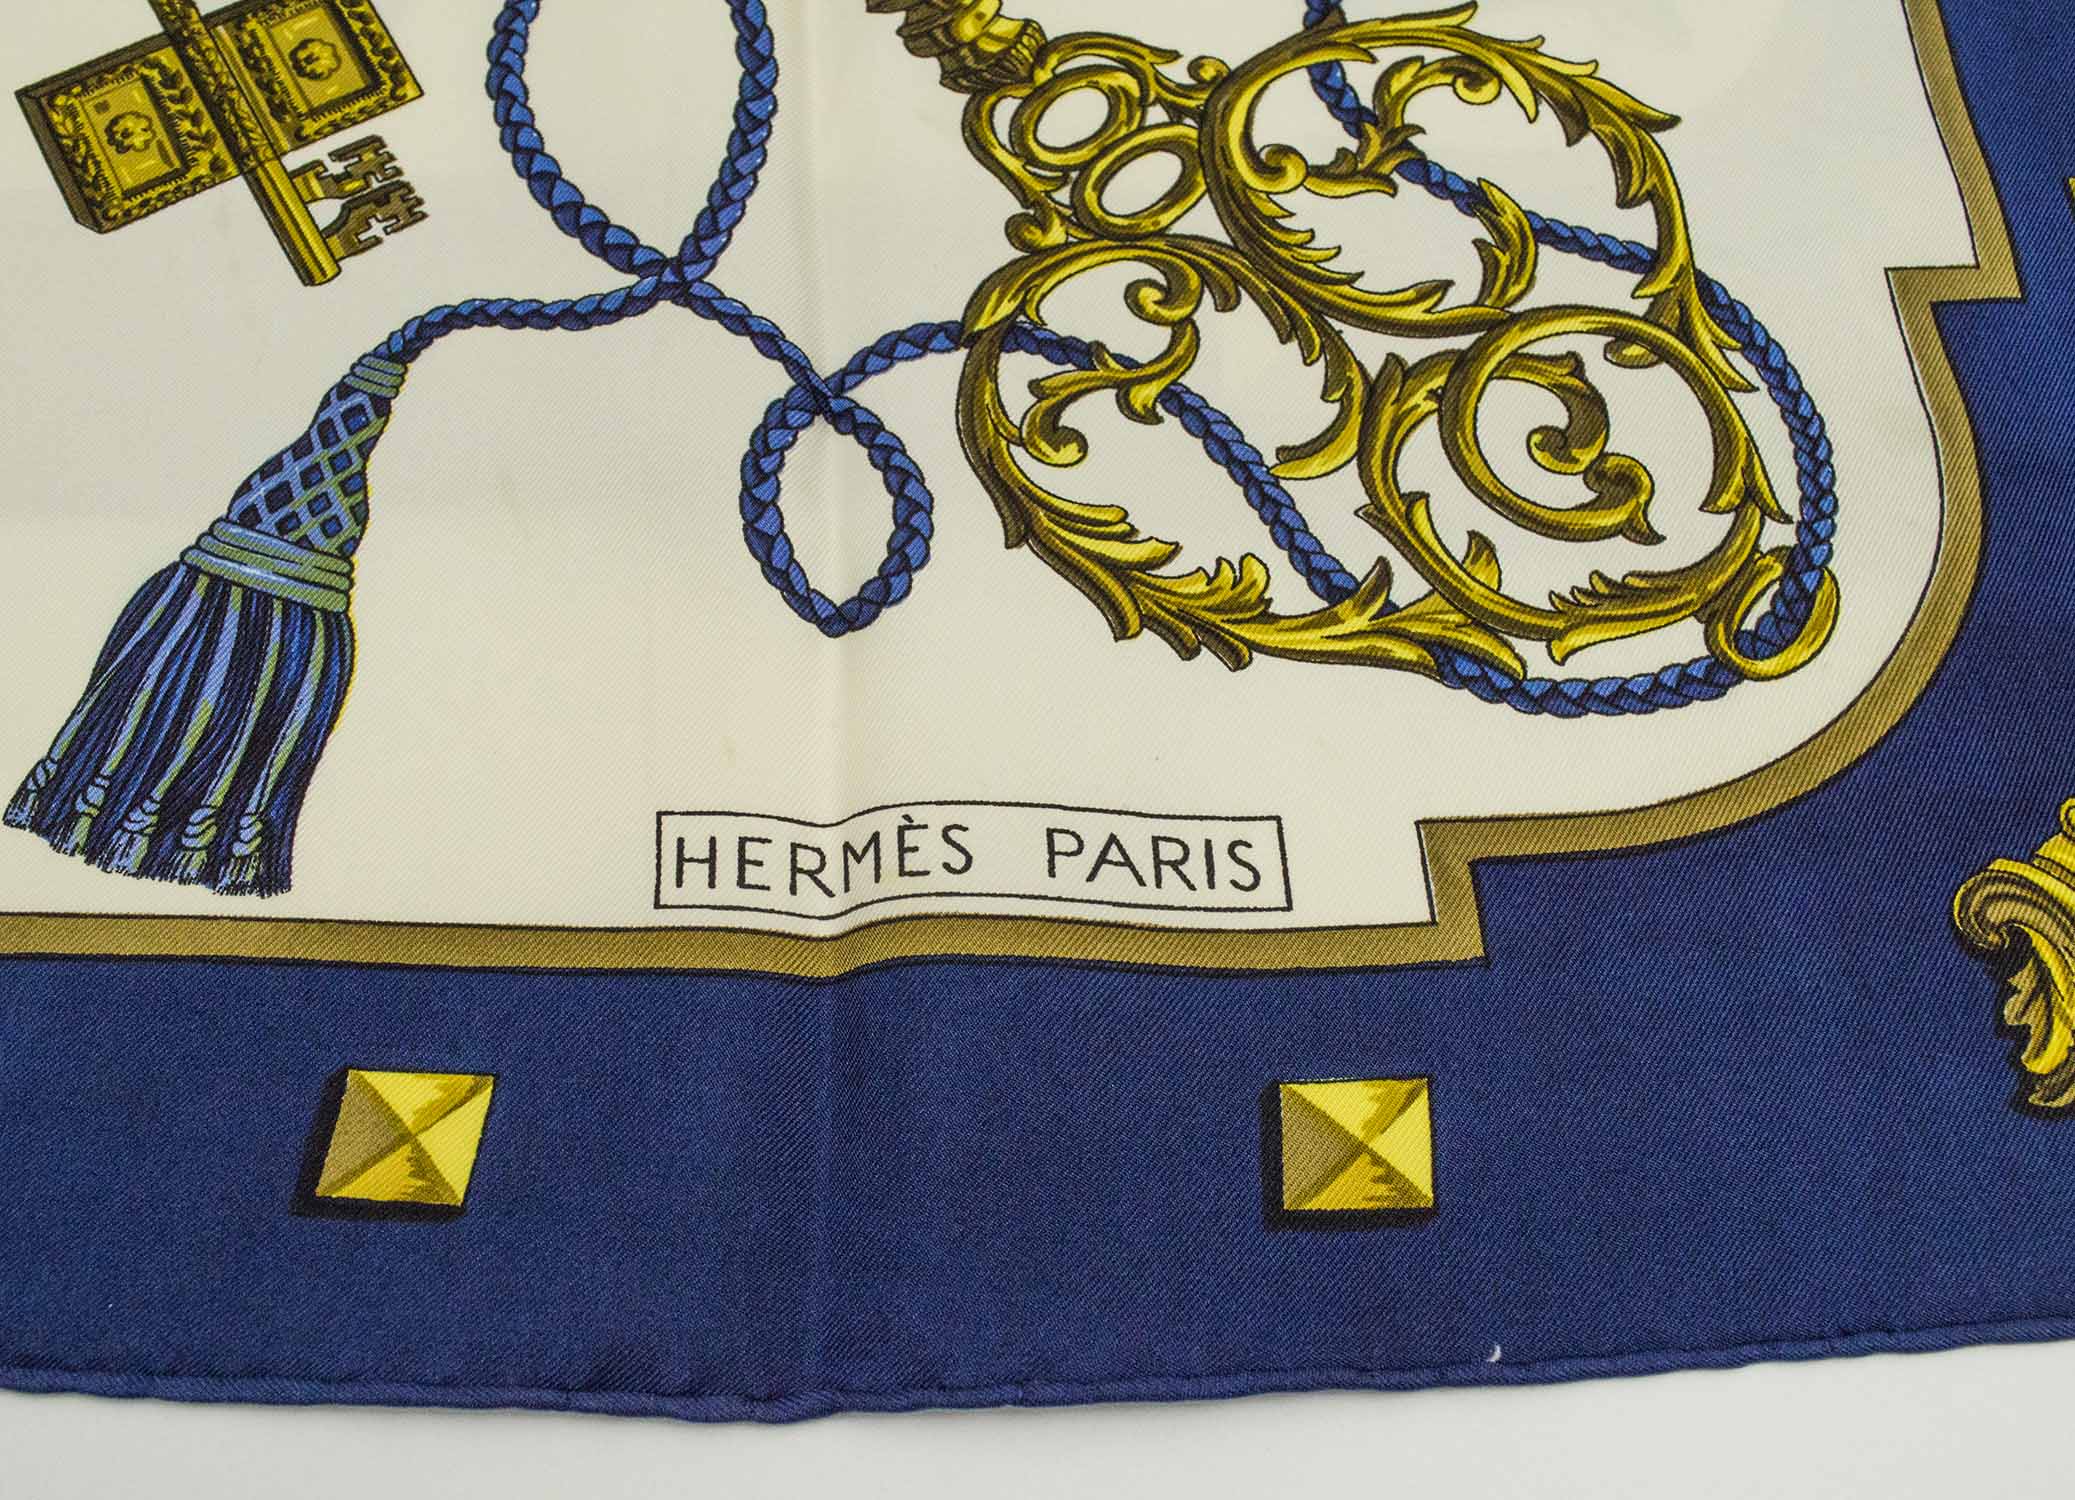 HERMÈS SCARF, 'Les clefs' of 'The keys', by Caty Latham, blue and gold, - Image 4 of 4